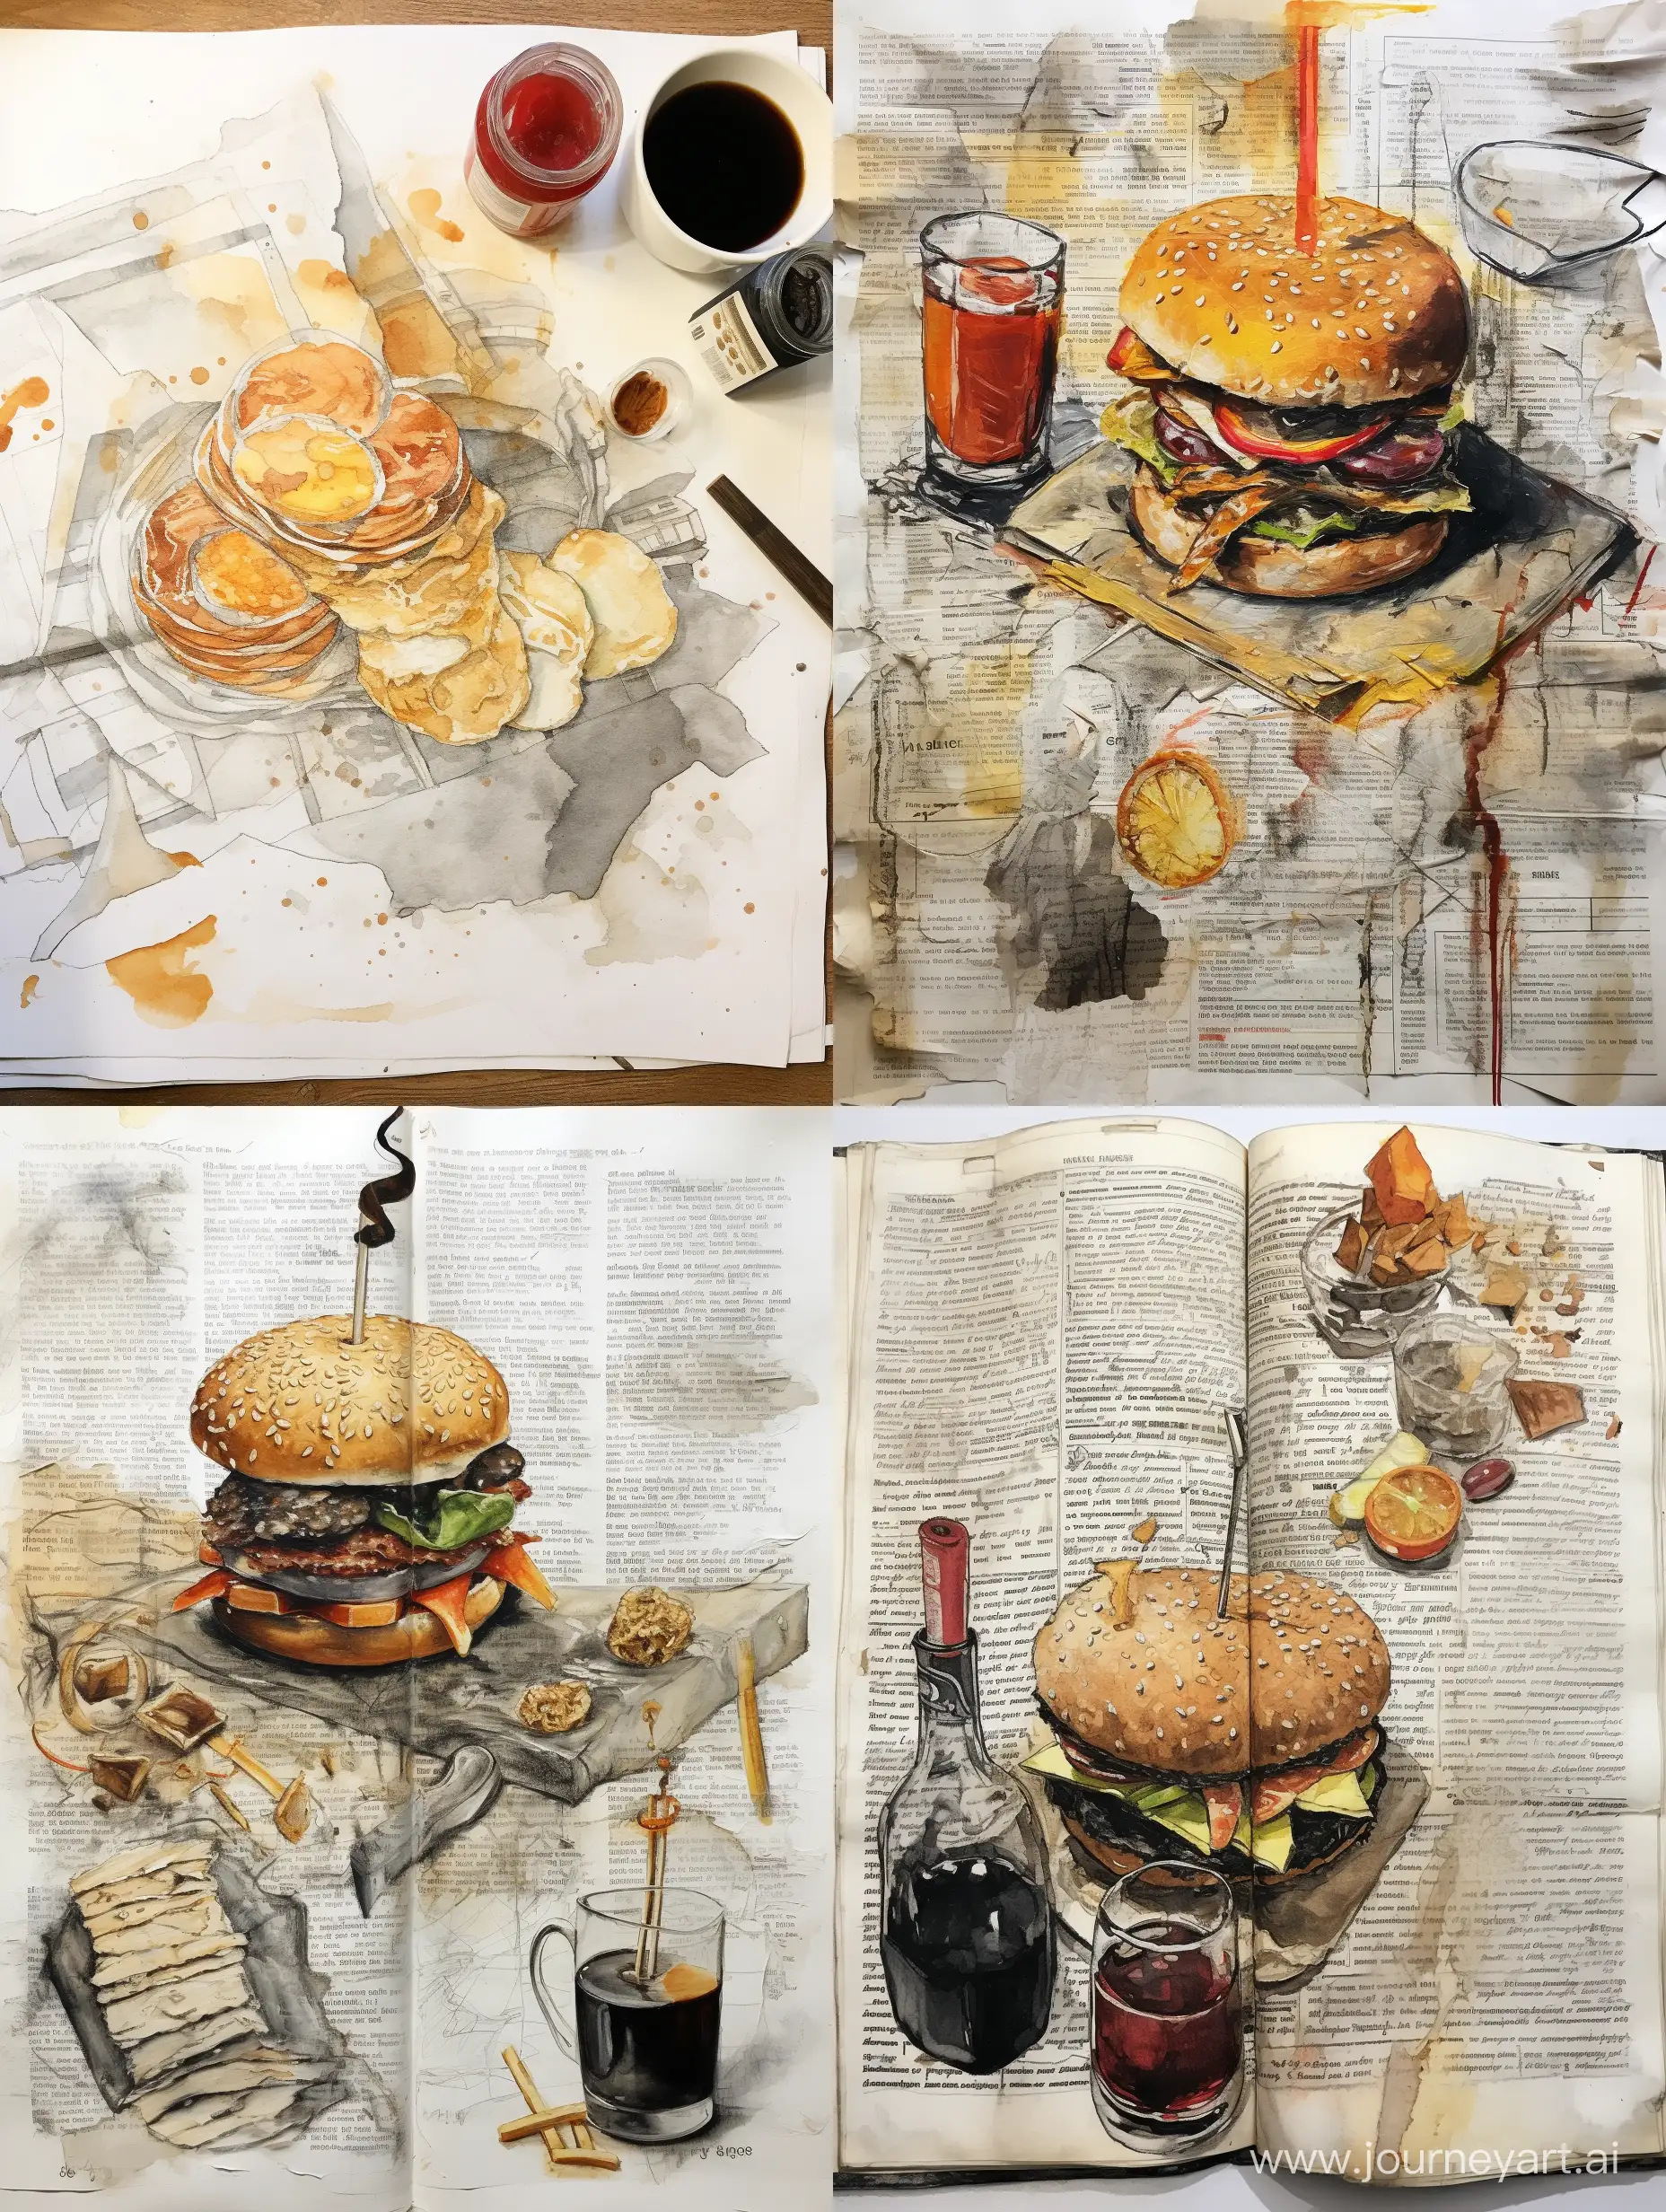 unfinished burger, one whiskey on rocks, pages of a manuscript, cigarette butts, ashes, mustard, ketchup smeared, lots of potato chips or fries, view from above, no backgruound, steadman's style in ink